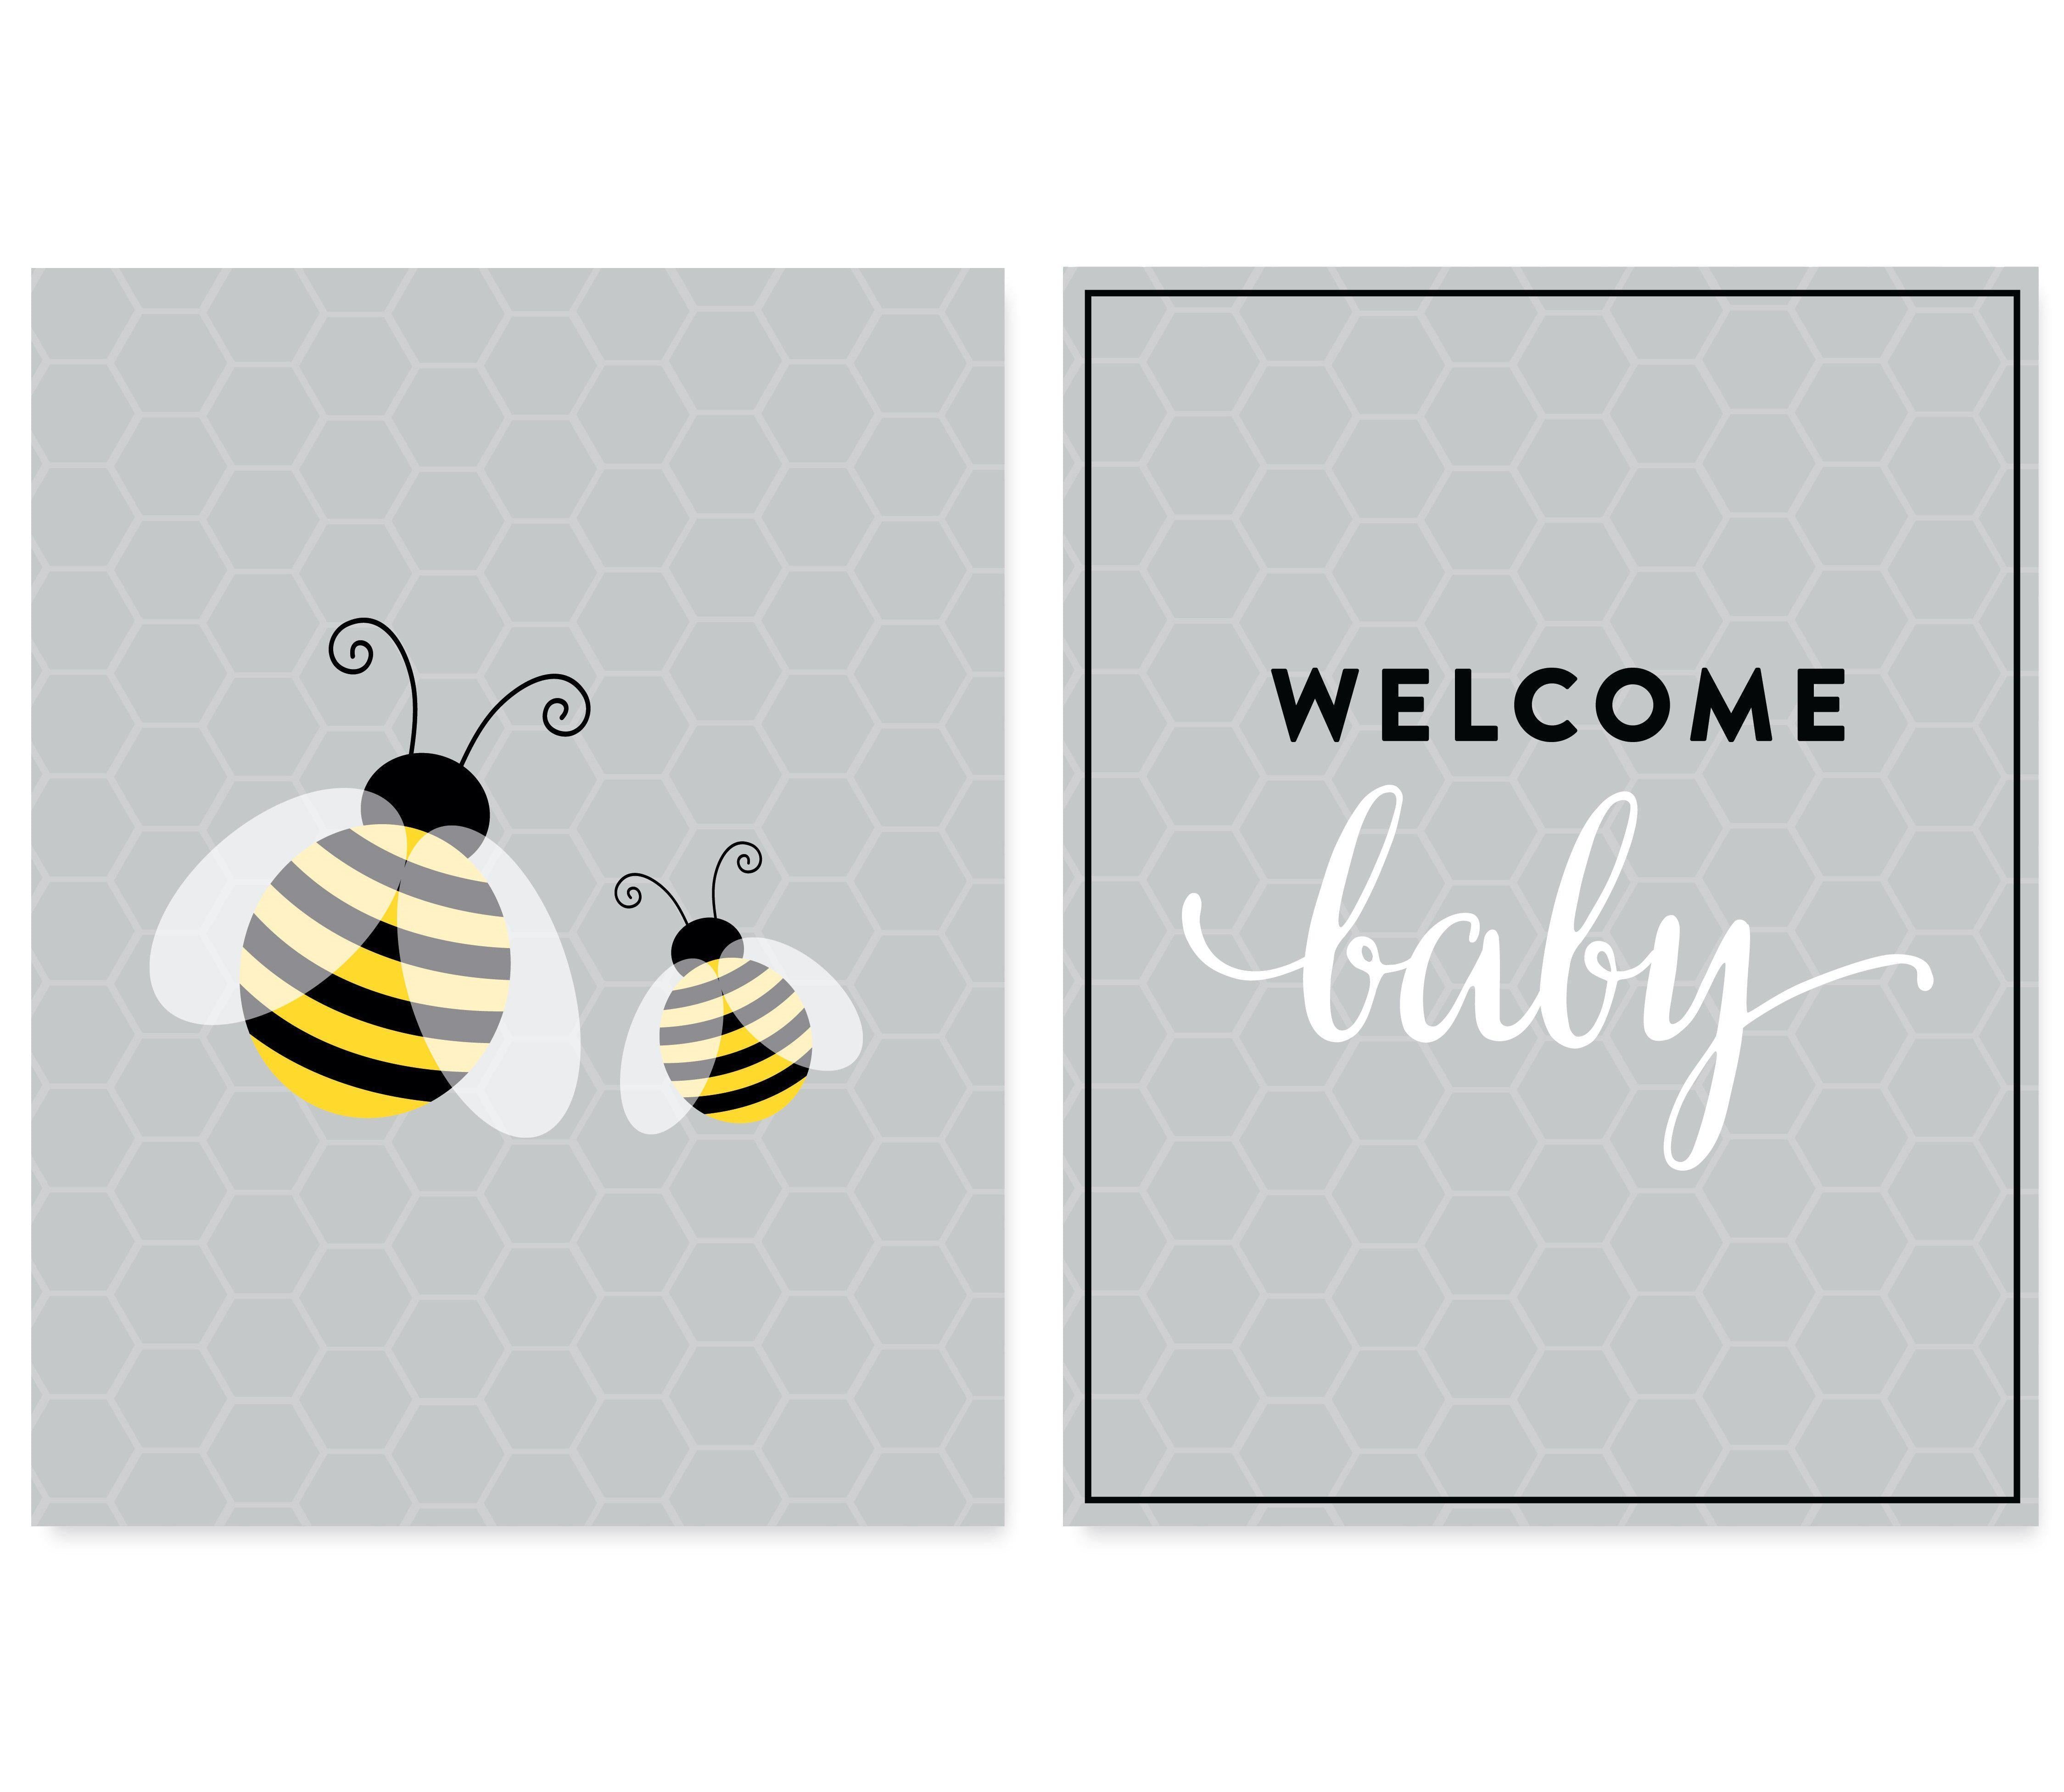 20 Baby Shower Decorations You Can Find on